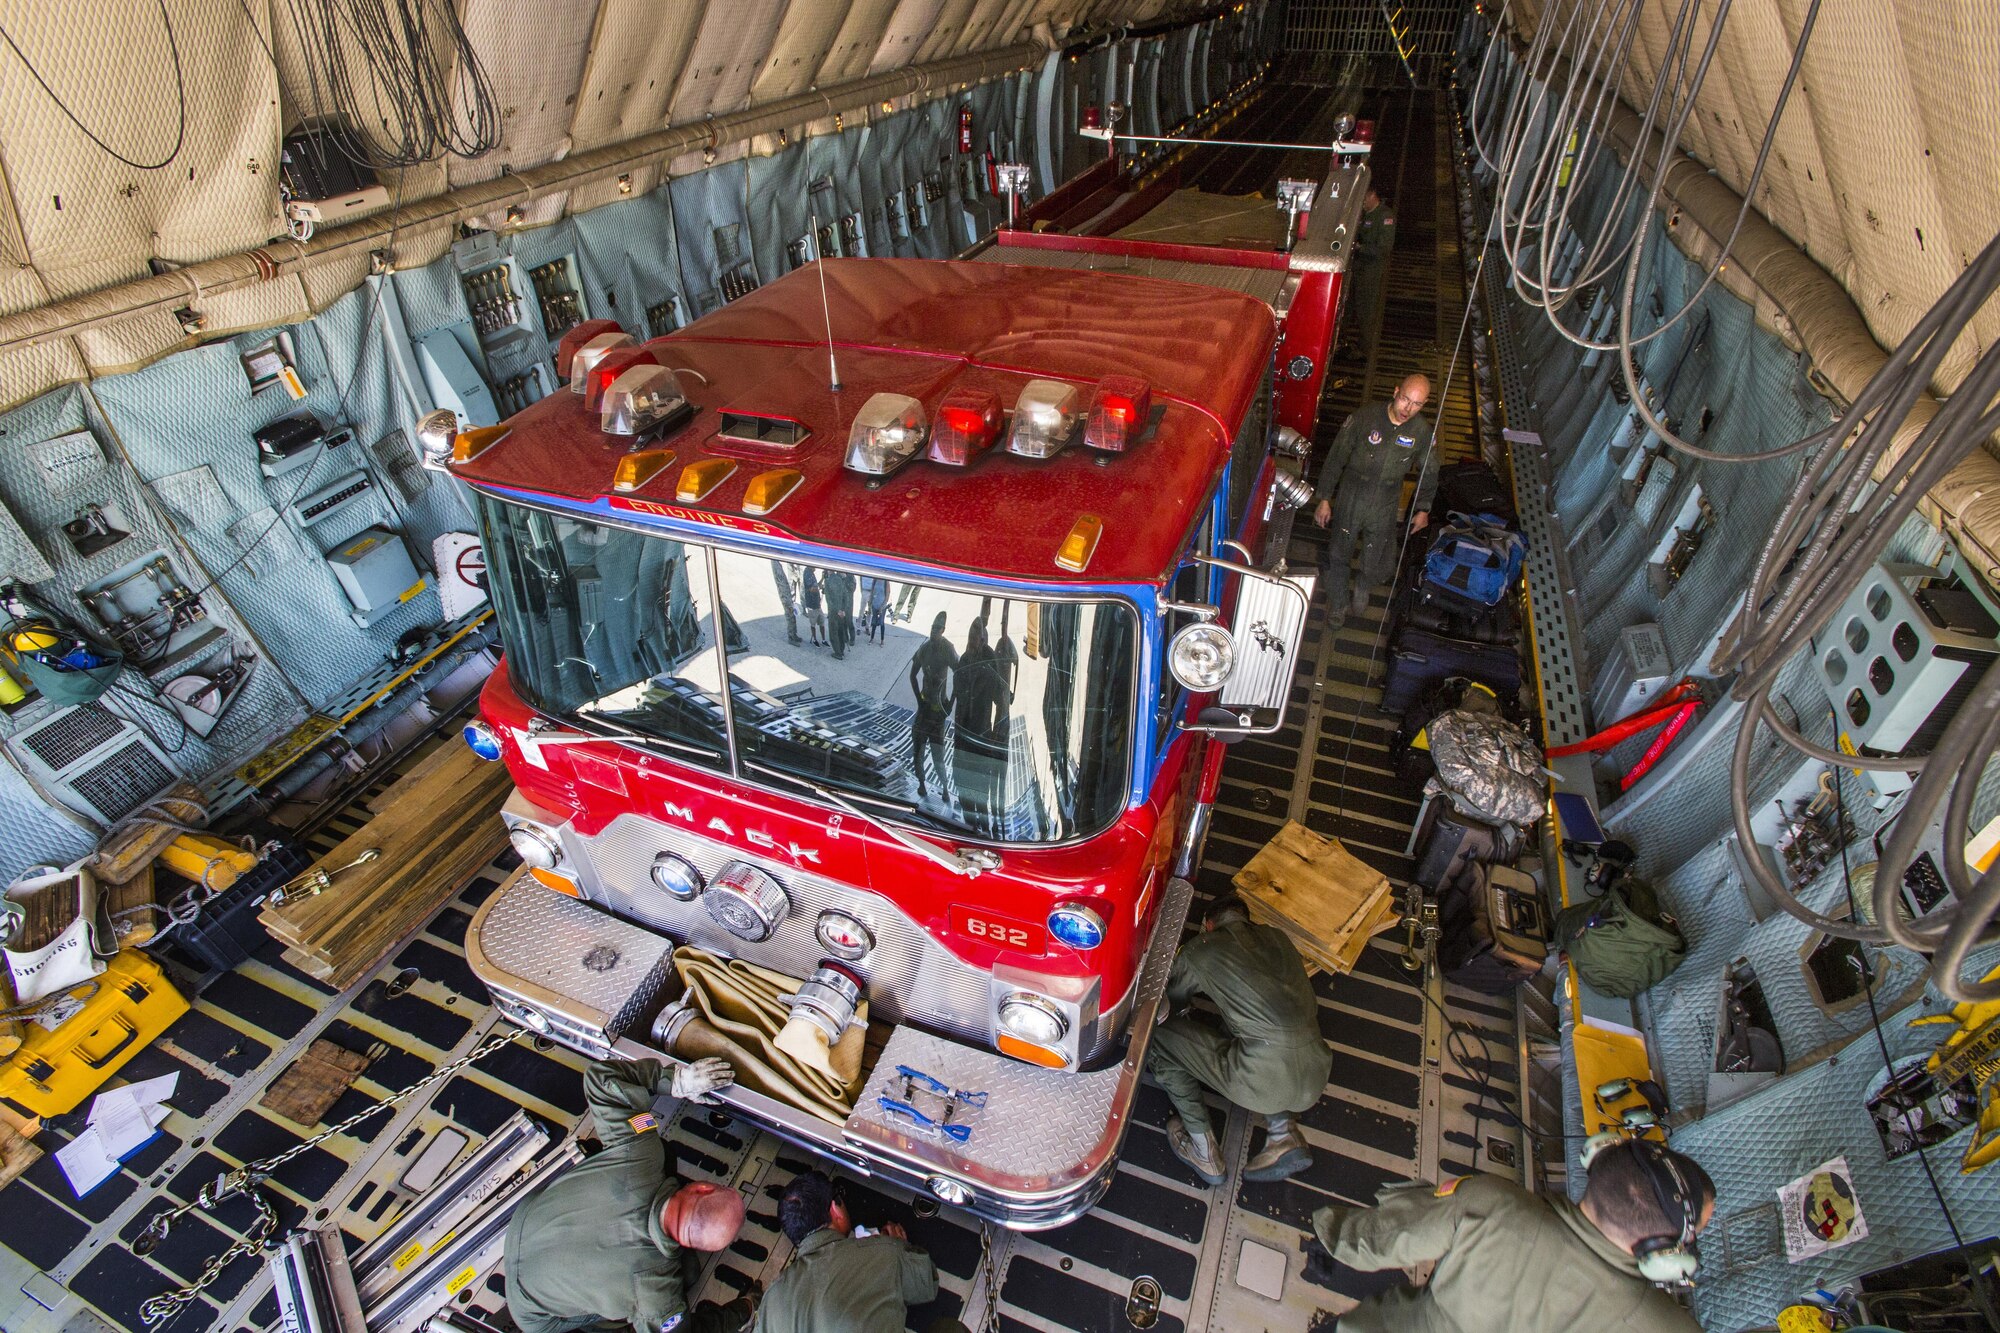 Loadmasters with the 439th Airlift Wing secure a 1982 Mack fire truck onto a C-5B Galaxy at Joint Base McGuire-Dix-Lakehurst N.J., on August 12, 2016. The truck will be flown to Managua, Nicaragua. Master Sgt. Jorge A. Narvaez, a traditional New Jersey Air National Guardsman with the 108th Security Forces Squadron, was instrumental in getting the truck donated to a group of volunteer firefighters in Managua. The truck donation is done through the Denton Program, which allows U.S. citizens and organizations to use space available on military cargo aircraft to transport humanitarian goods to countries in need. The 439th is located at Westover Air Reserve Base, Mass.